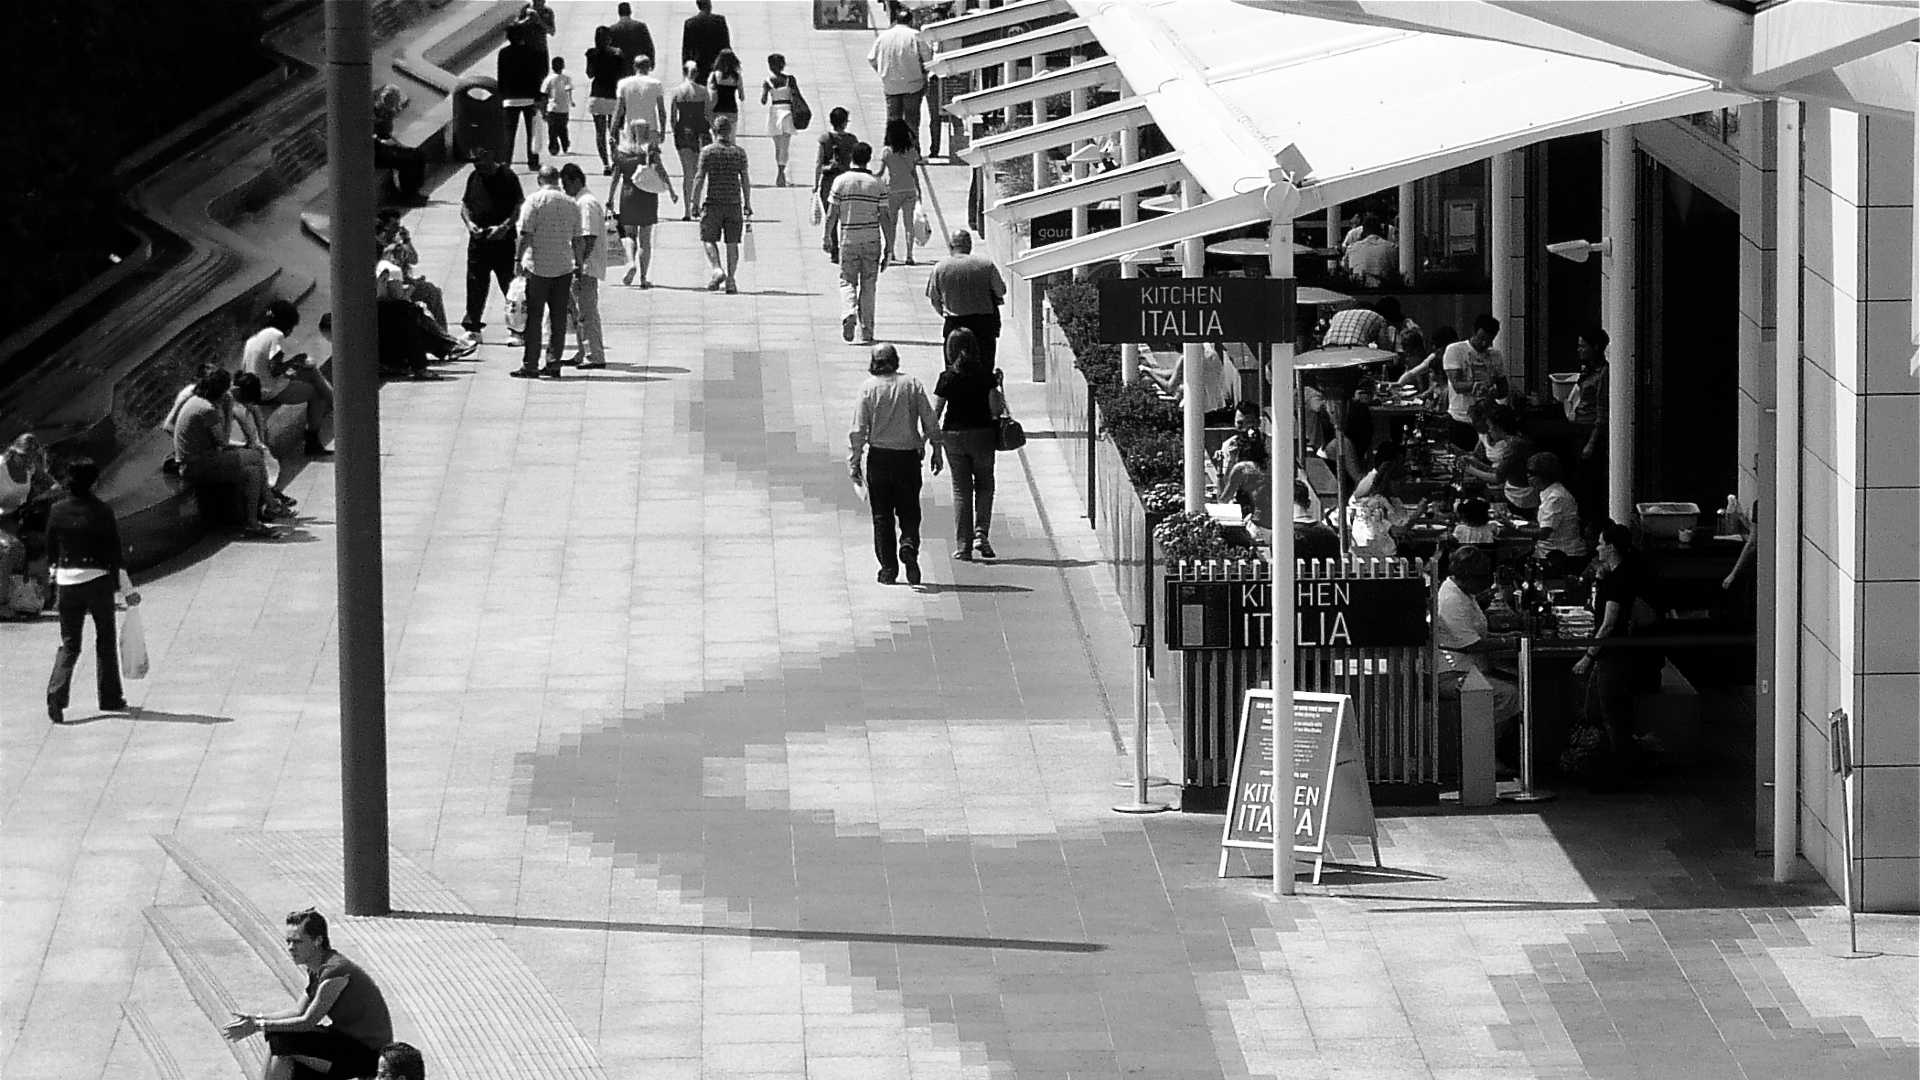 "Westfield" by Herry Lawford, used under CC BY 2.0 / Cropped, desaturated and resampled from original